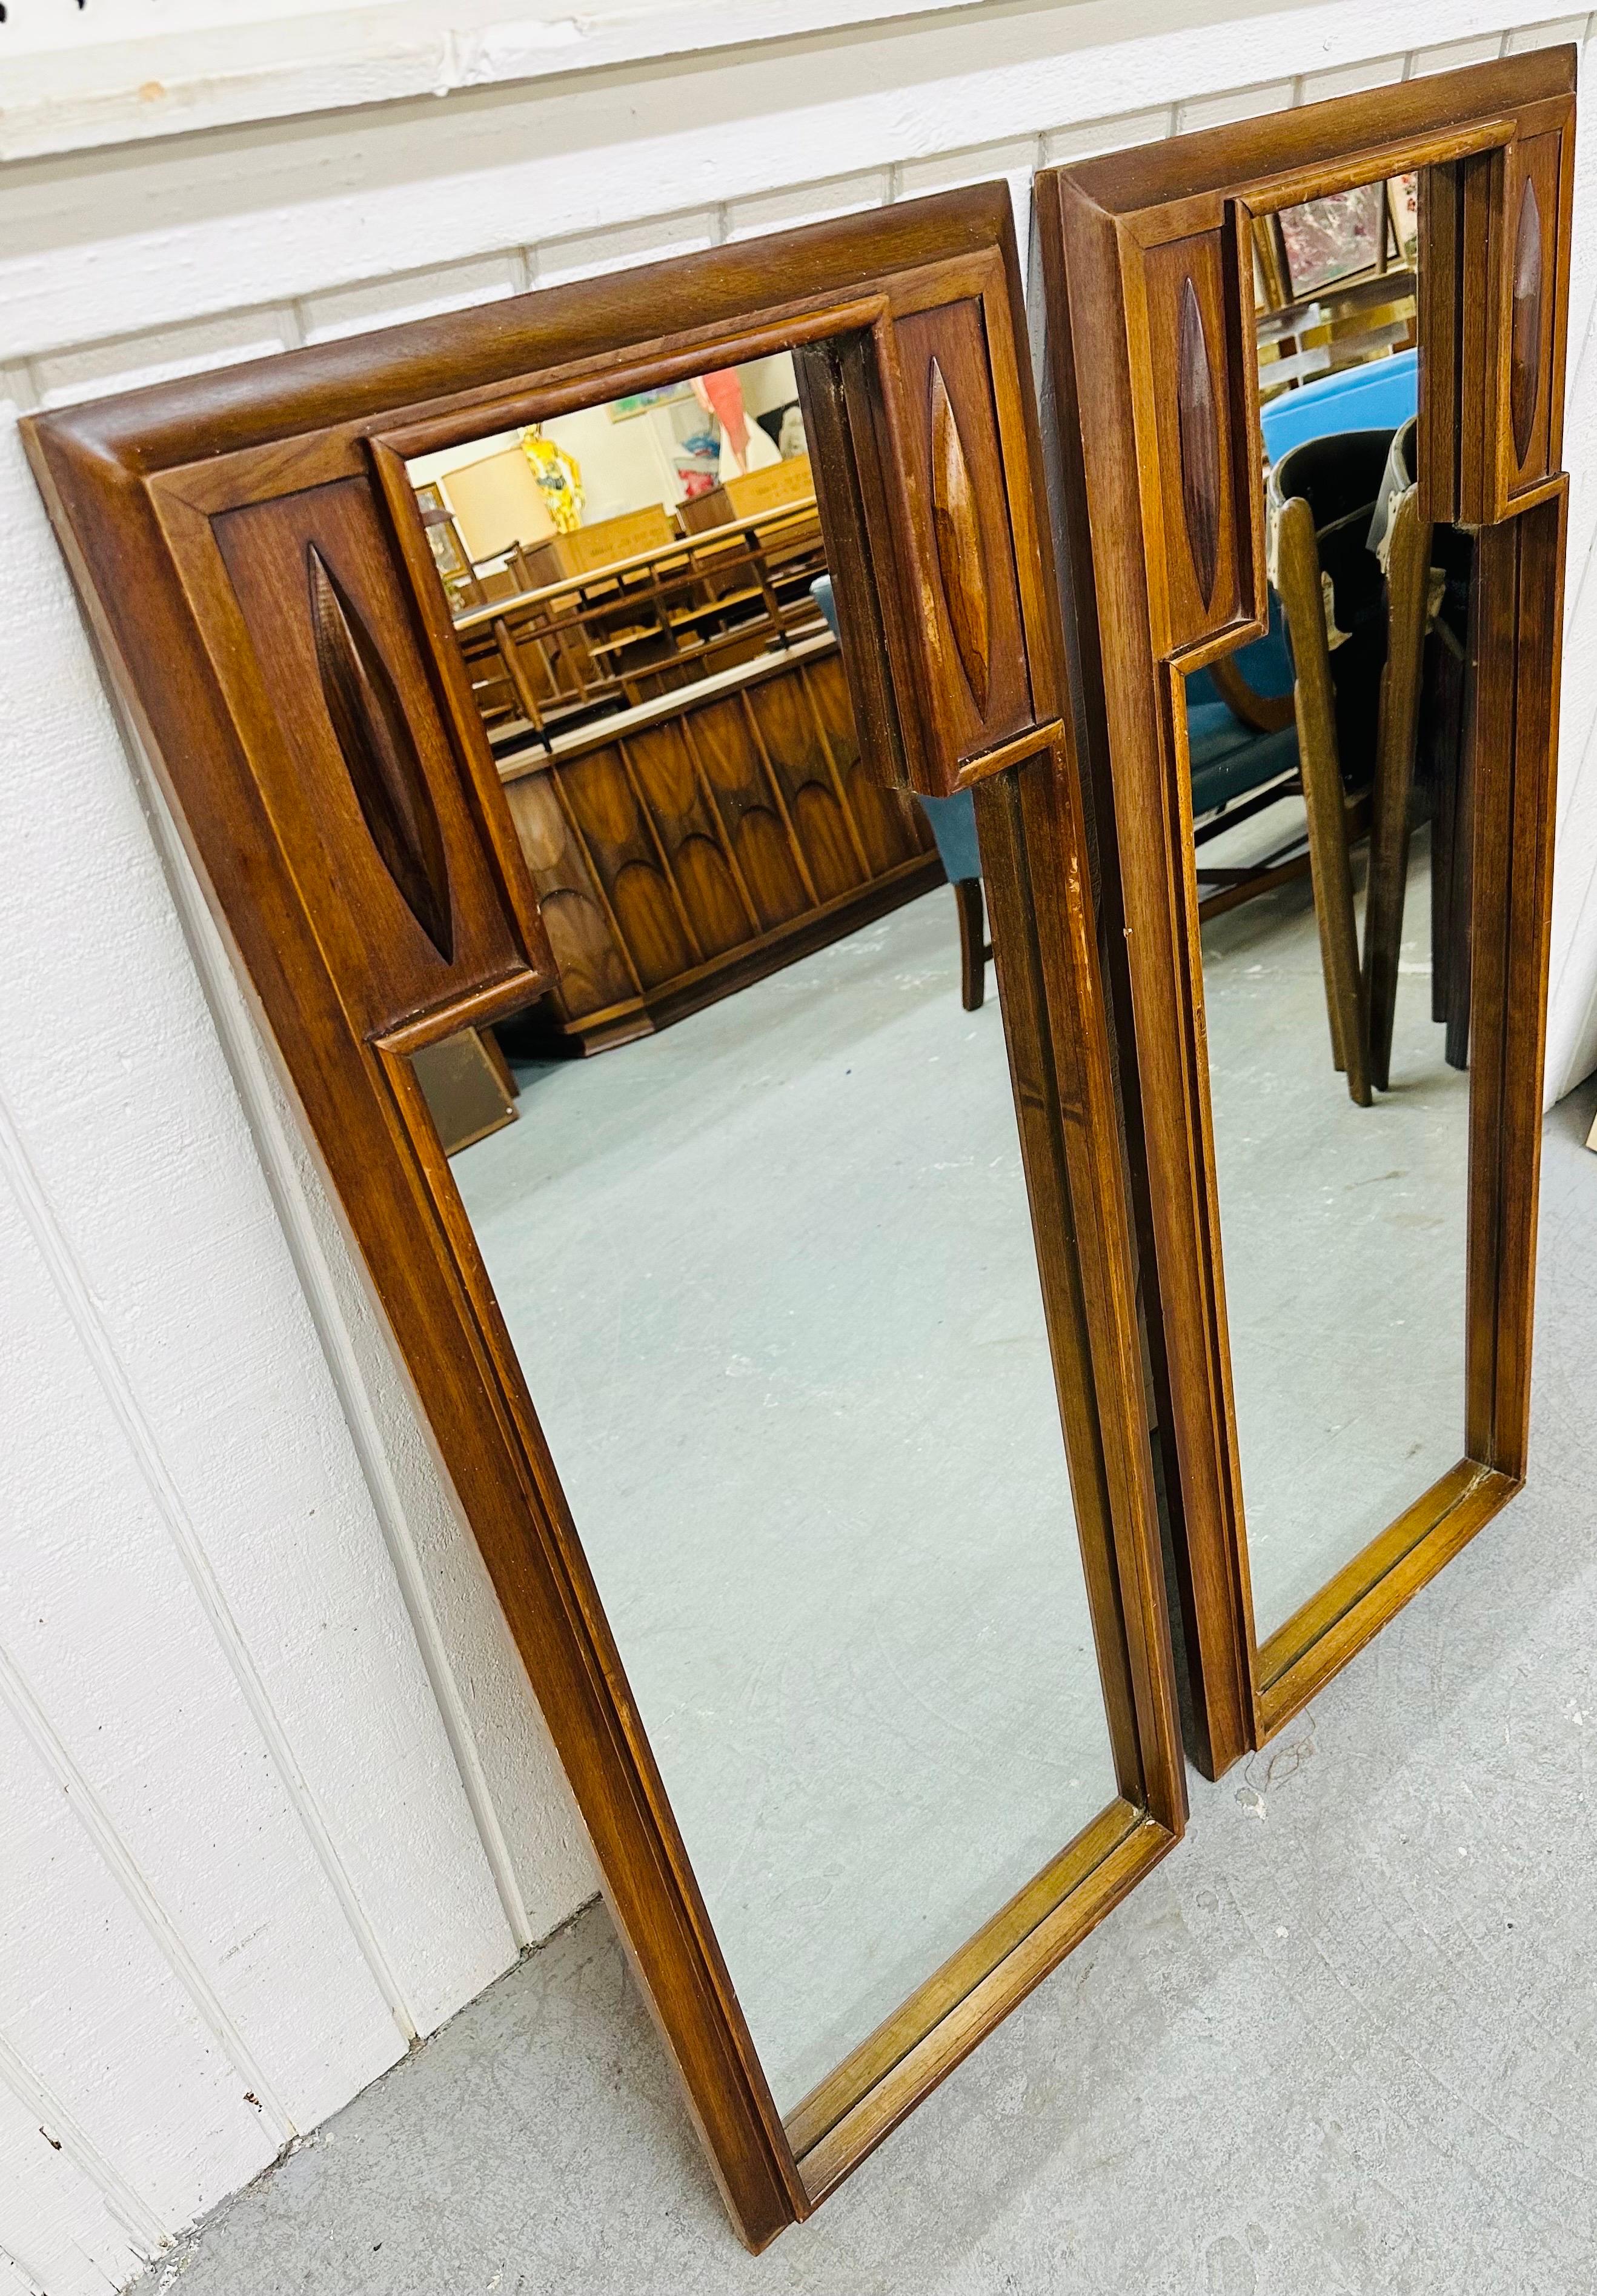 This listing is for a pair of Mid-Century Modern Broyhill Sculptra Walnut Mirrors. Featuring a straight line rectangular design, the Broyhill Sculptra design in each of the top corners, a walnut frame, and original mirror. This is an exceptional